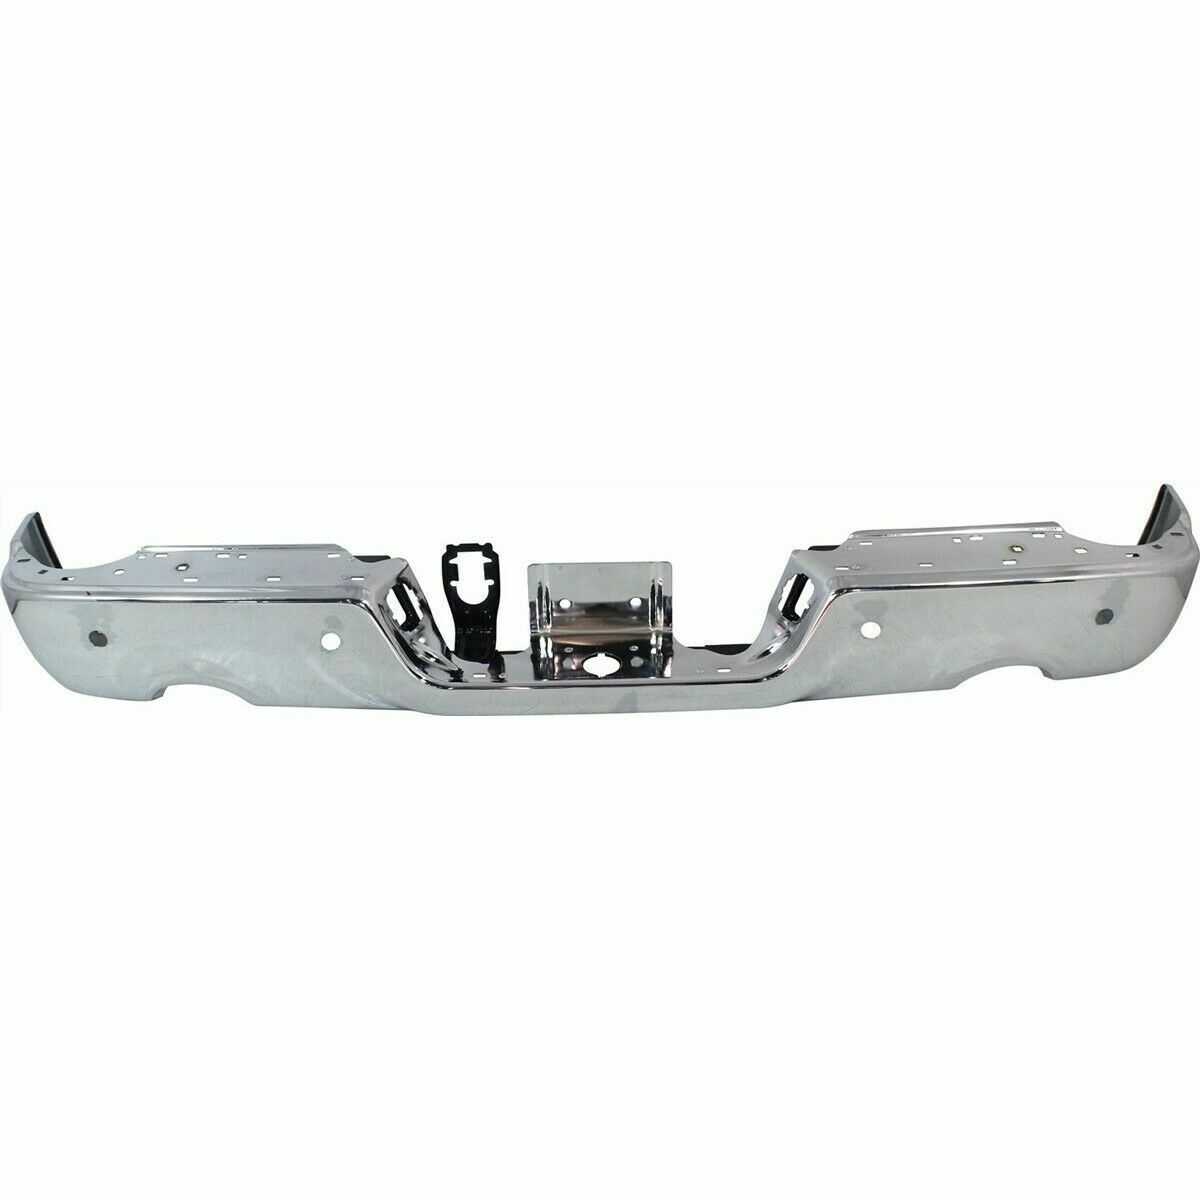 NEW Chrome Rear Step Bumper For 2009-2018 Dodge RAM 1500 SHIPS TODAY